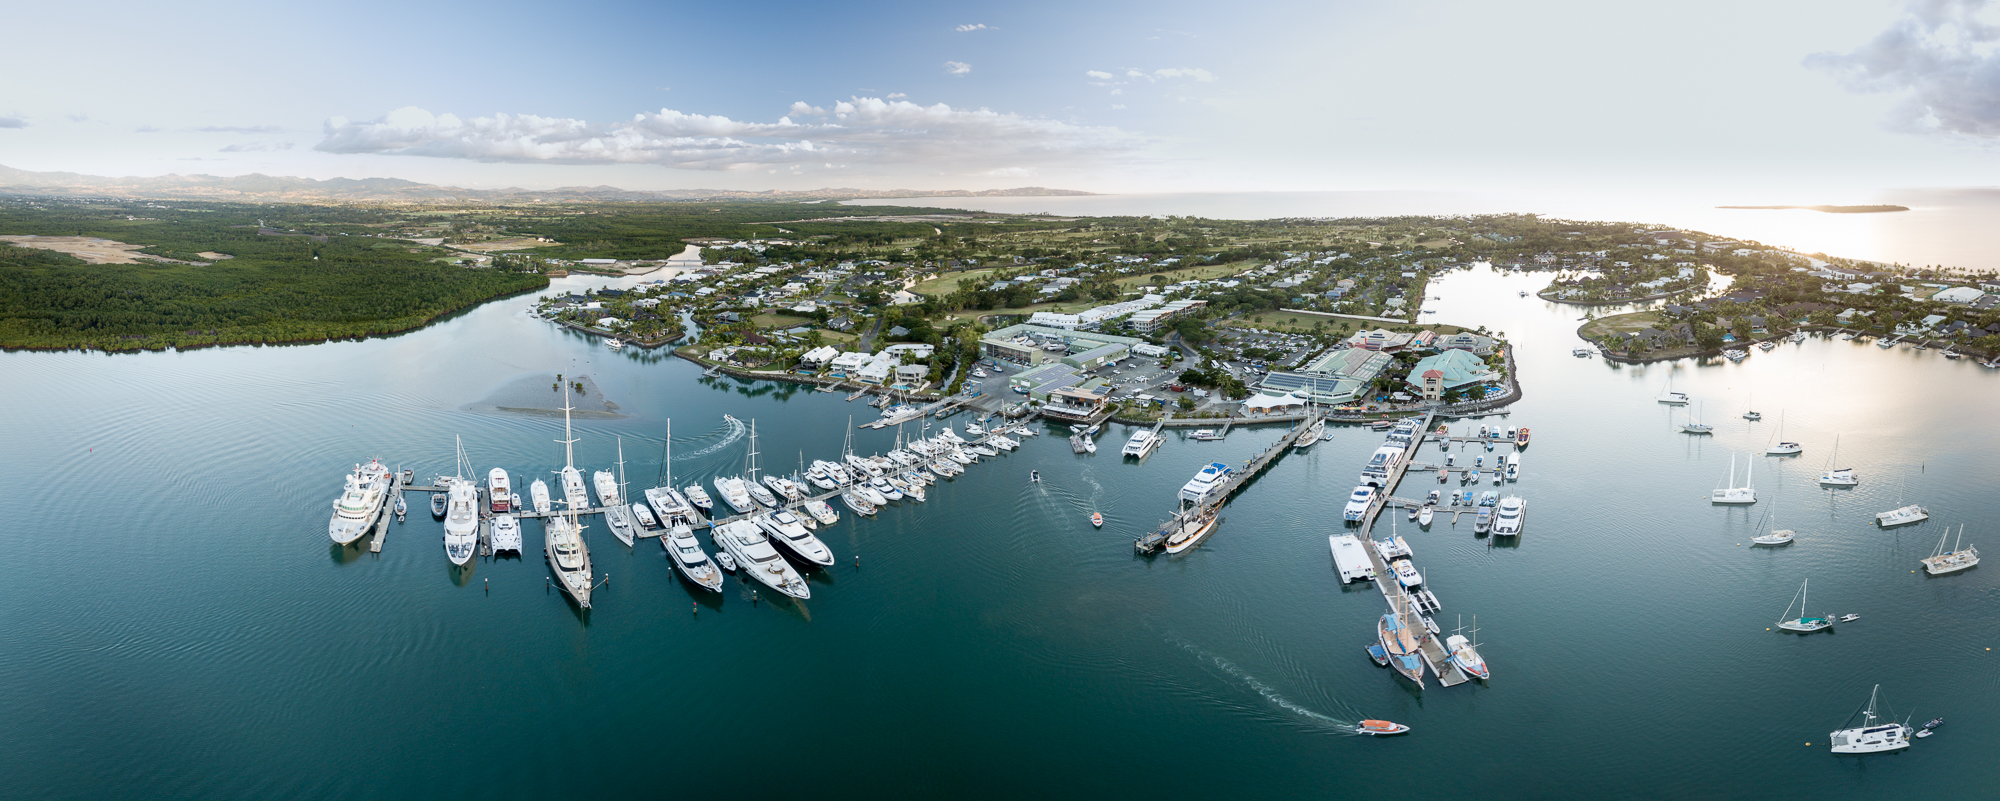 Discover how Pacsoft's marina management software empowers Port Denarau, Fiji's premier marina, achieving 100% berth occupancy, global recognition, and seamless operations. Join the success journey